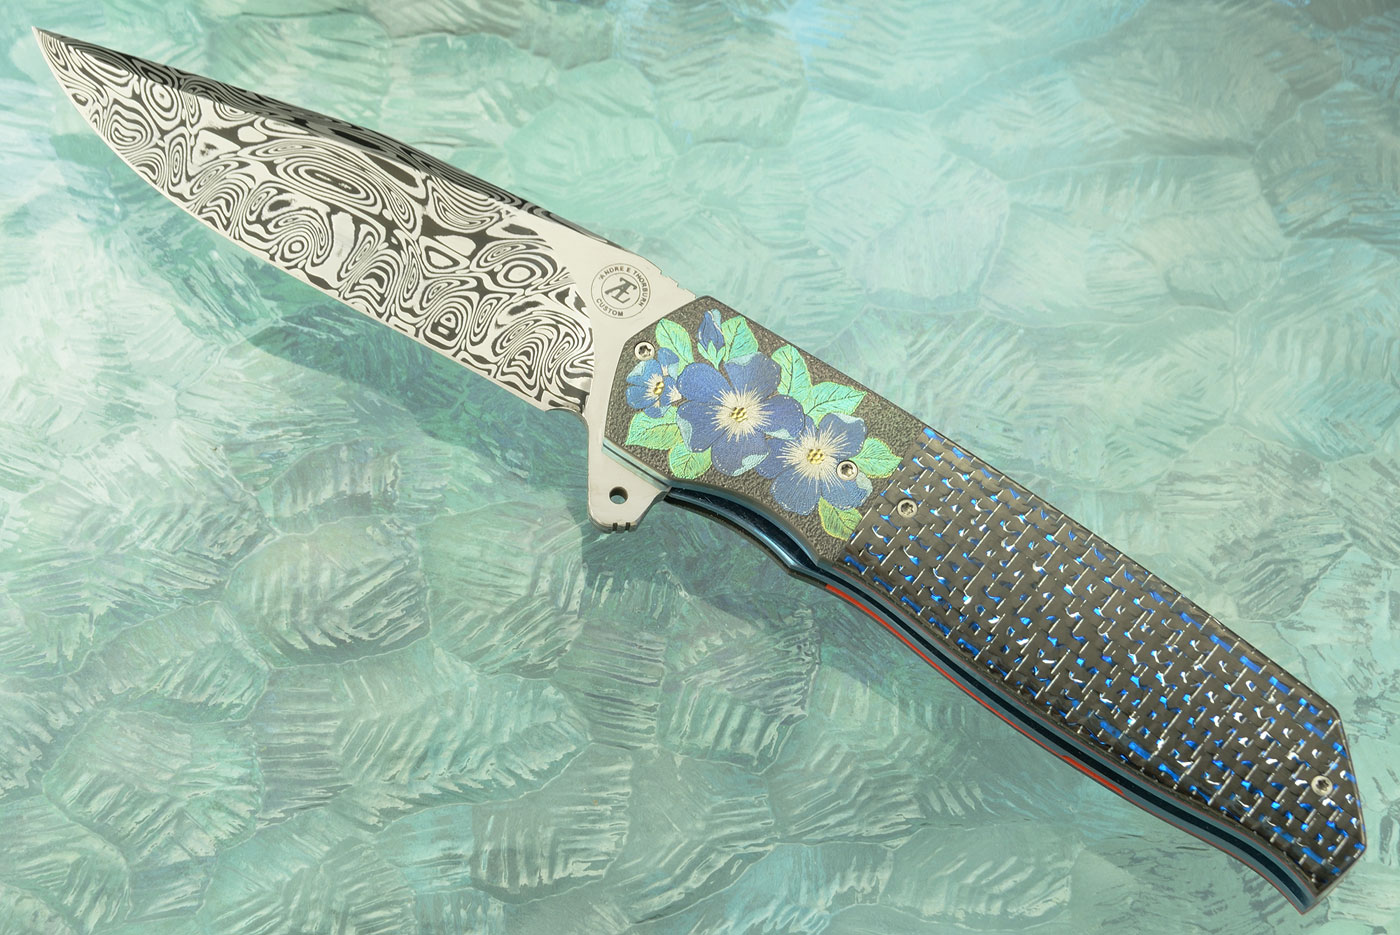 L36S Flipper with Blue/Silver Carbon Fiber, Engraved Zirconium, and Damascus (Ceramic IKBS)